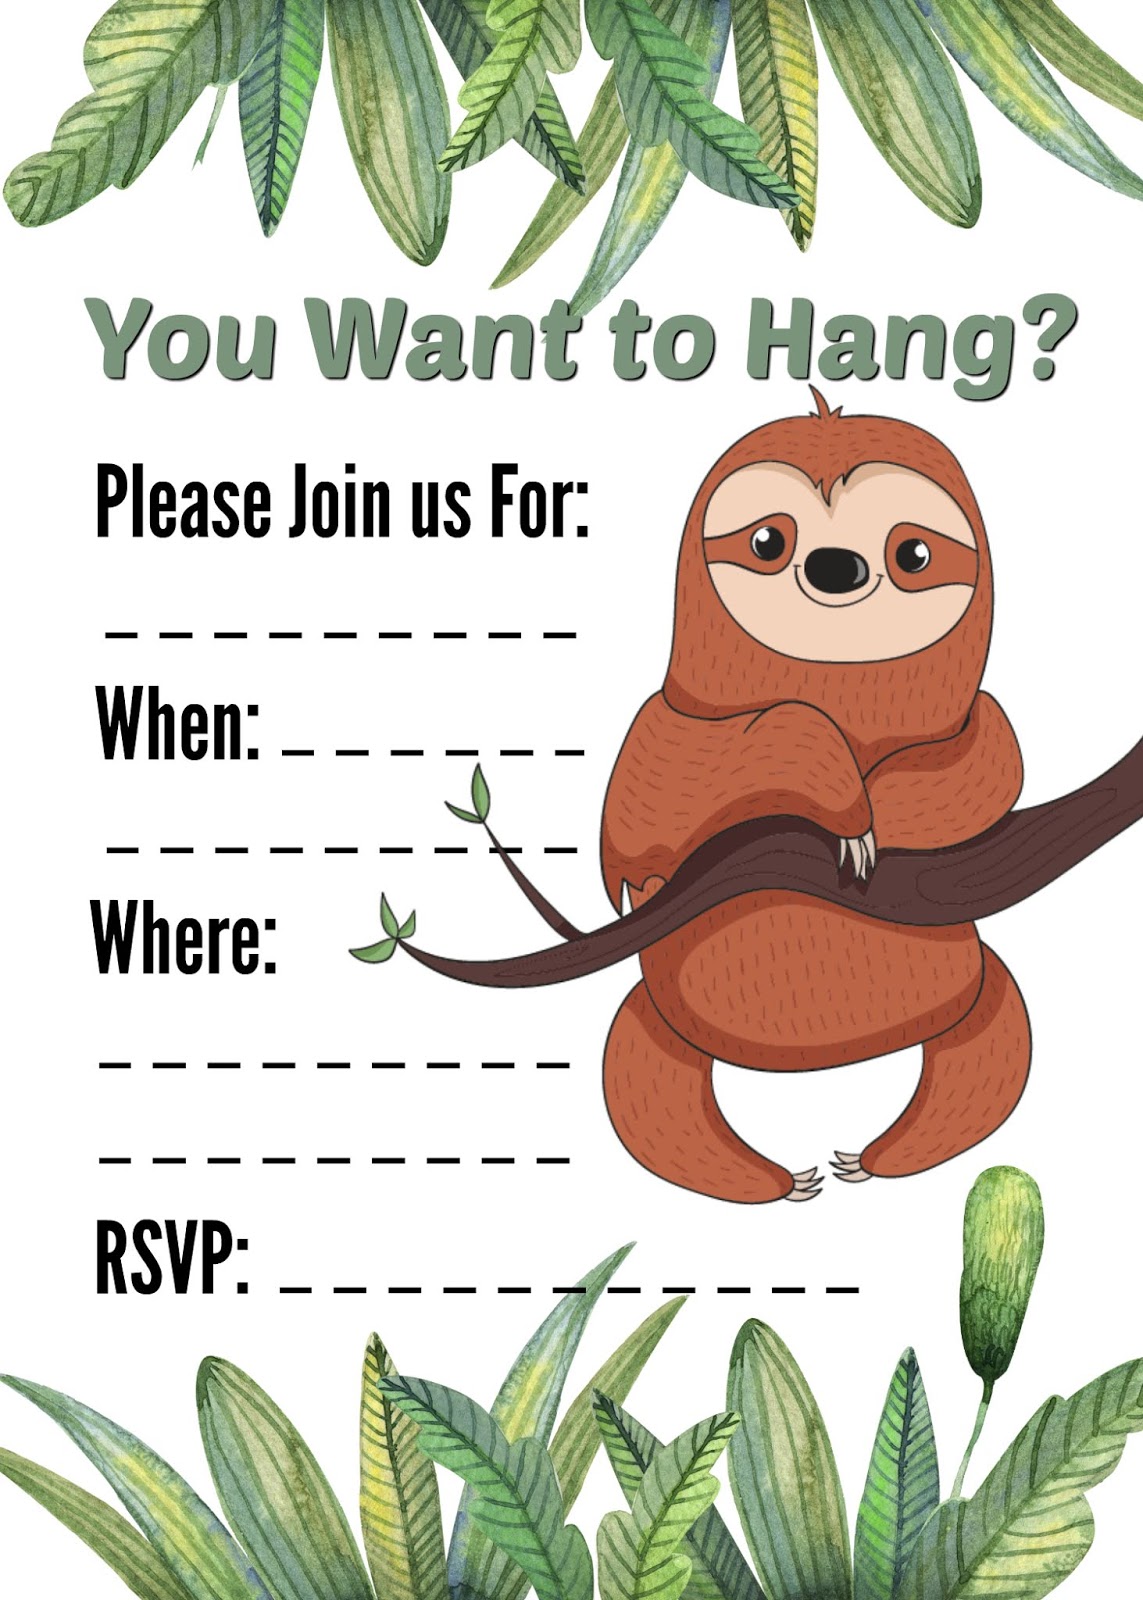 paper-party-supplies-sloth-template-4x6-5x7-zoo-invitation-sloth